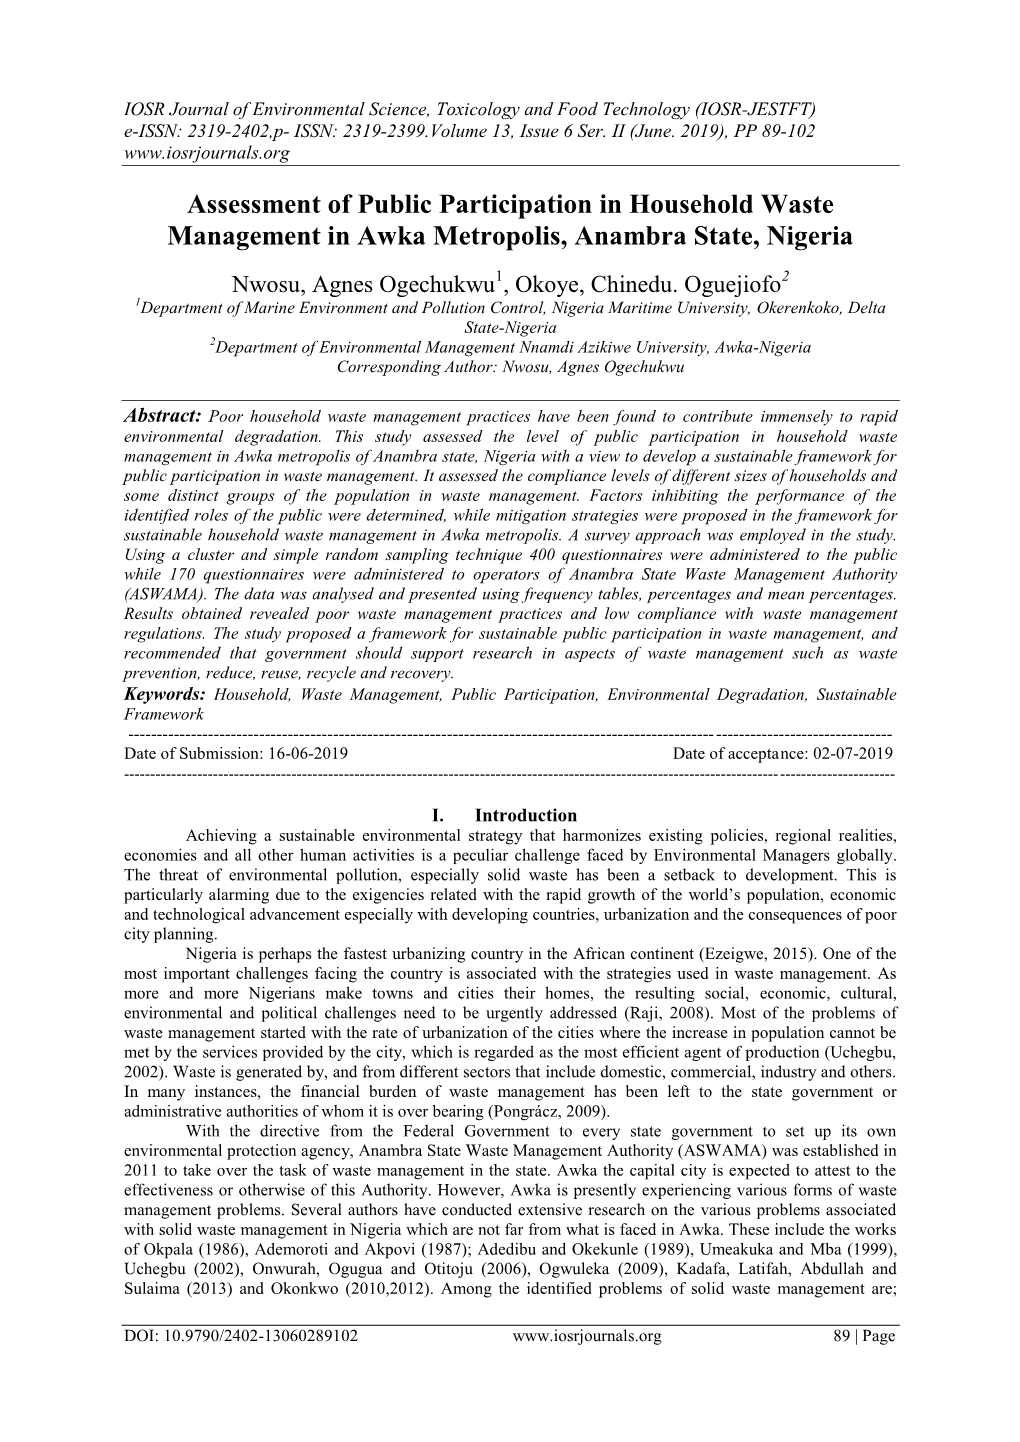 Assessment of Public Participation in Household Waste Management in Awka Metropolis, Anambra State, Nigeria